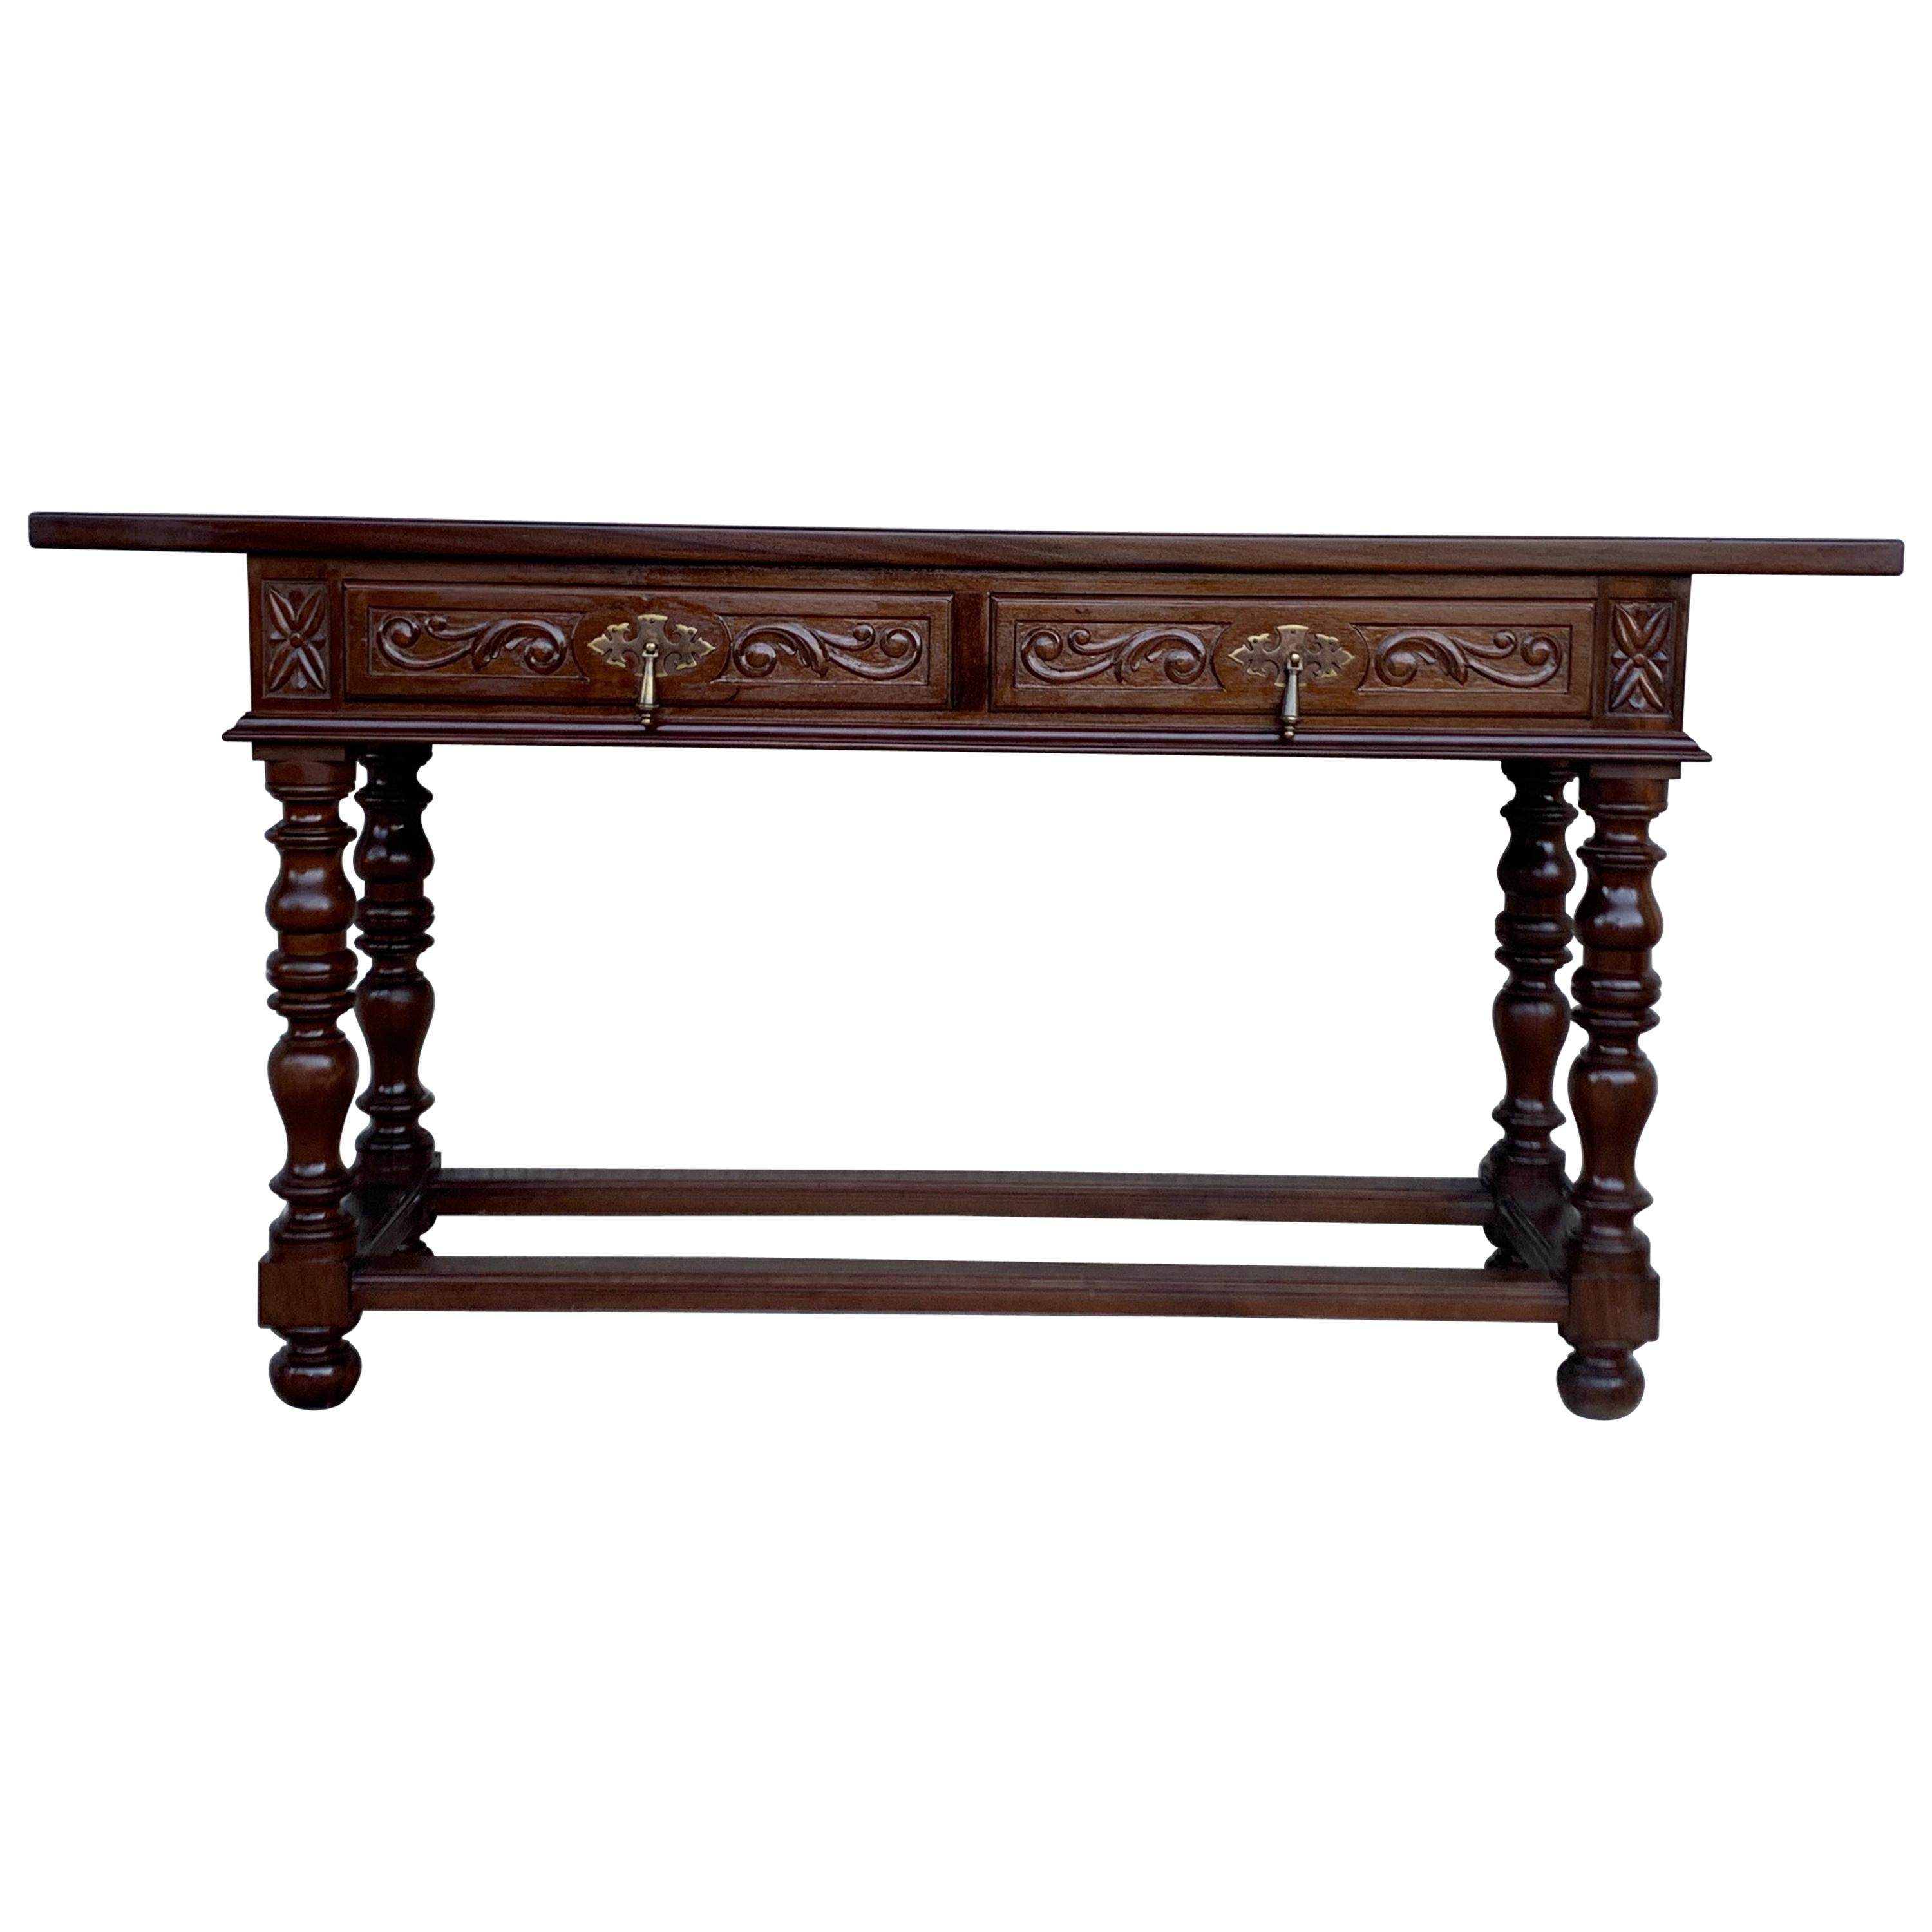 20th Century Spanish Tuscan Console Table with Two Drawers and Turned Legs